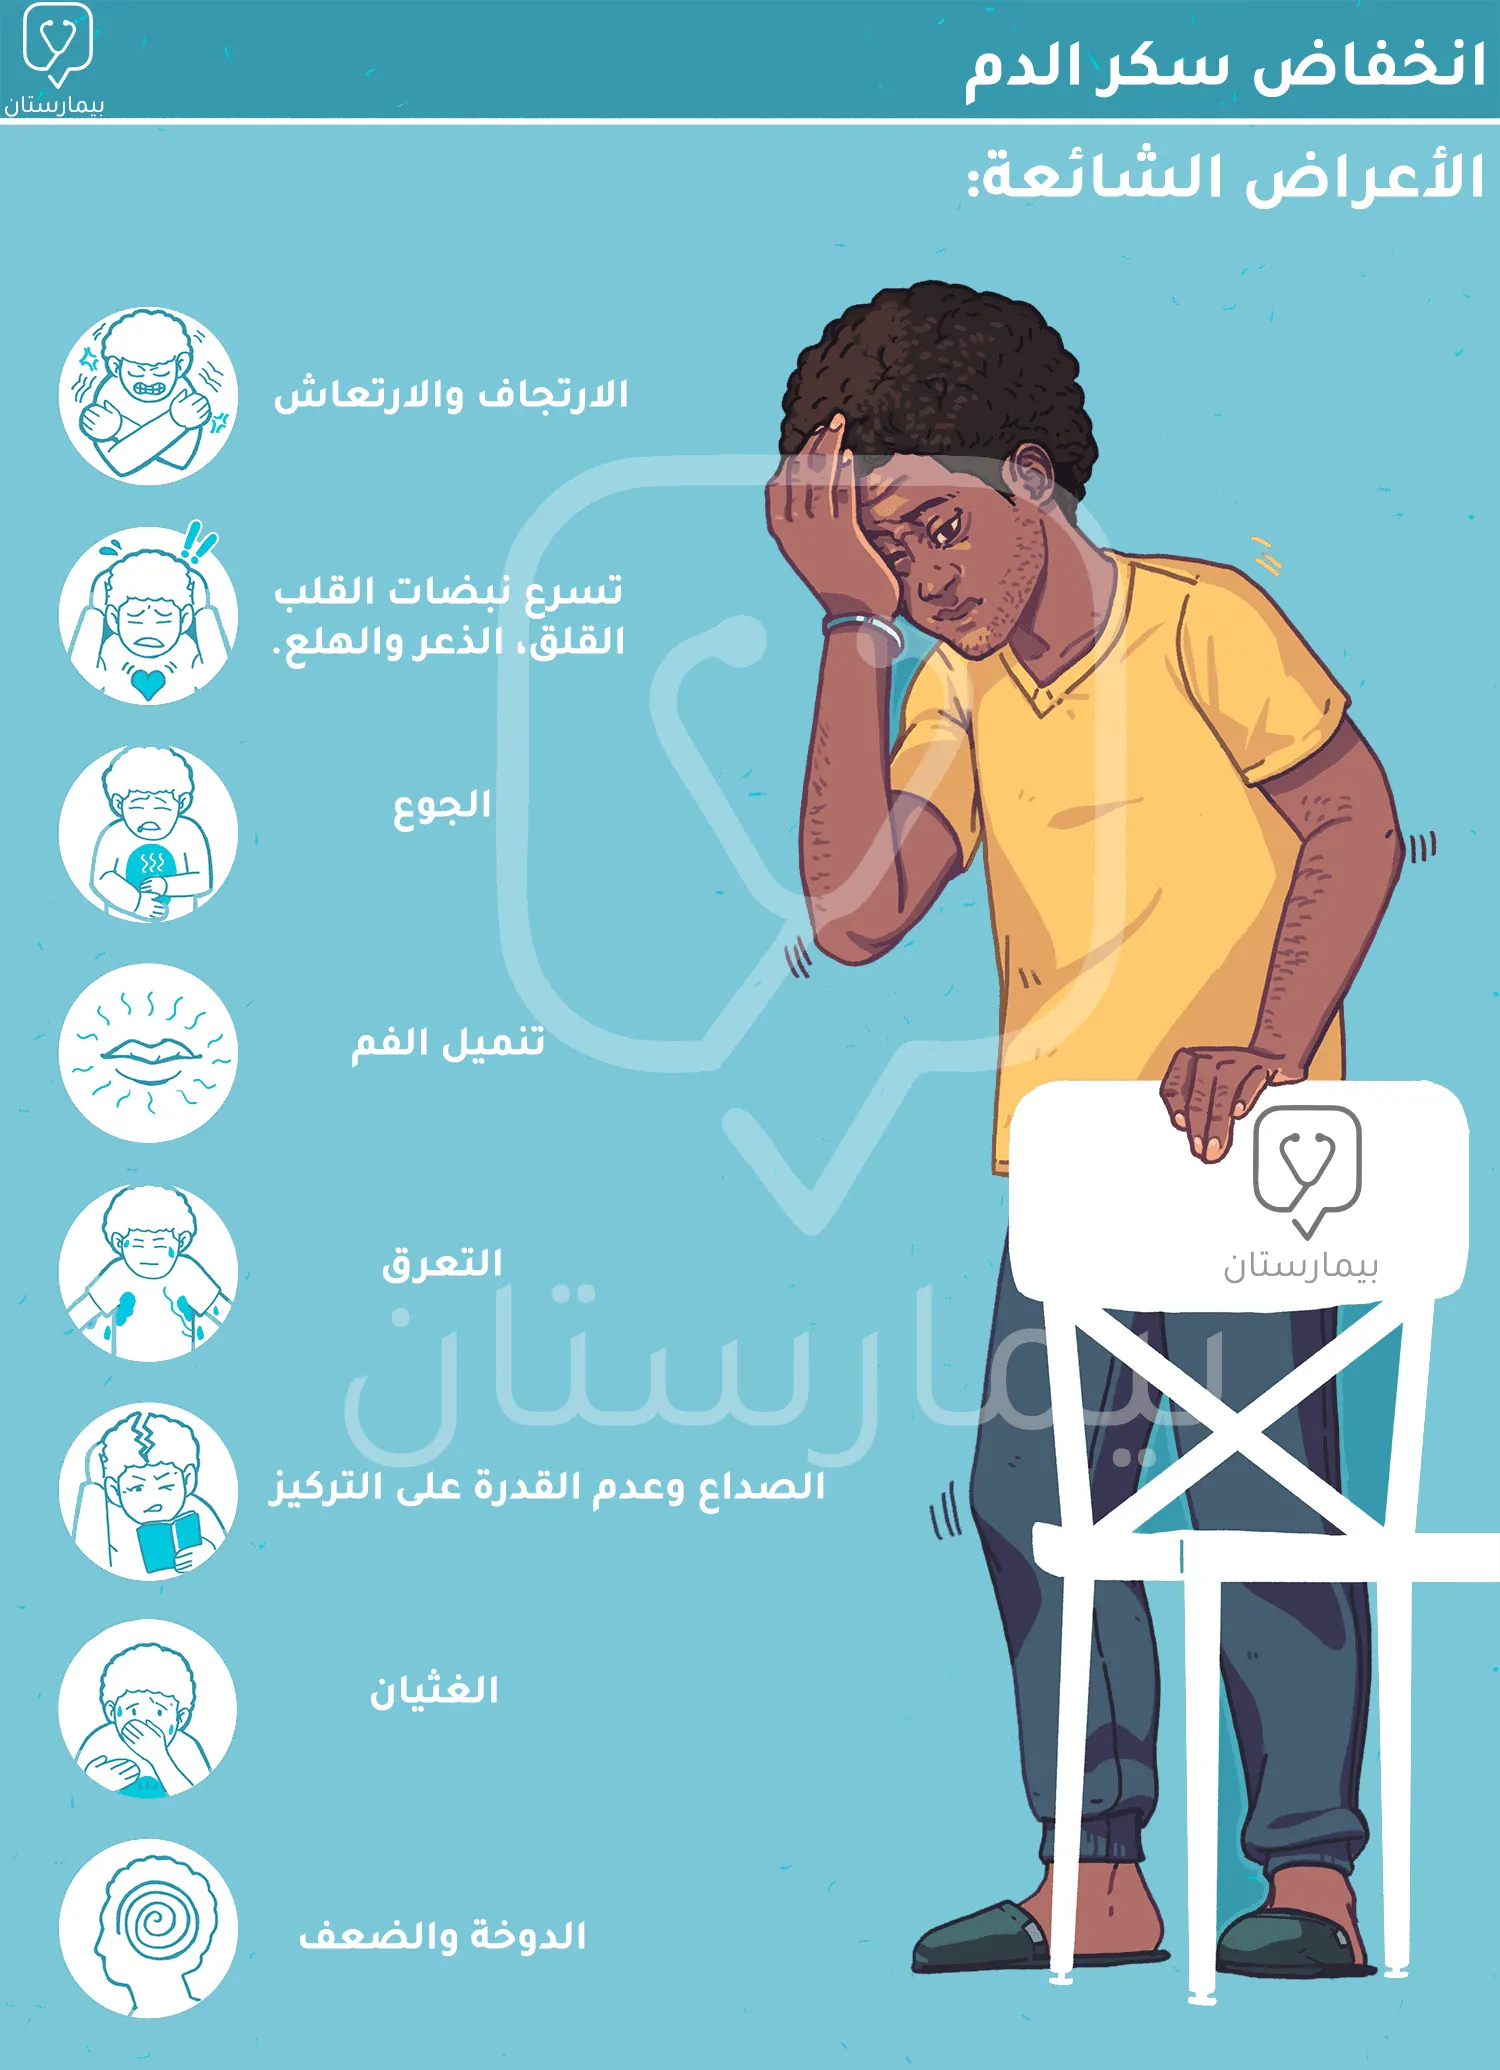 A picture showing the symptoms of hypoglycemia (one of the causes of dizziness in women)